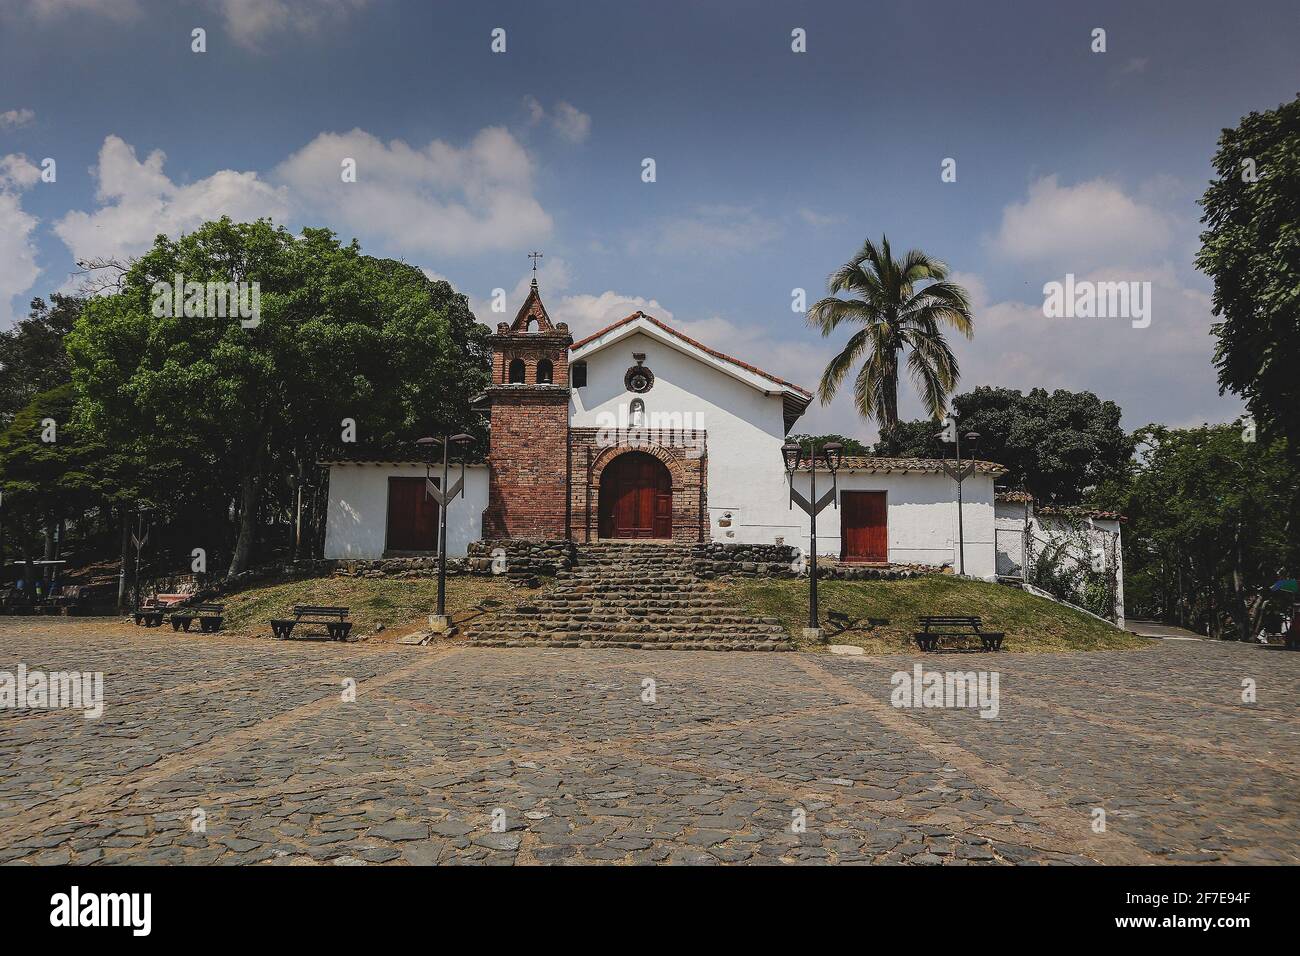 Church of San Antonio above the city of Cali, Colombia, on a sunny day with some clouds. Cobblestone road in front is visible. Stock Photo